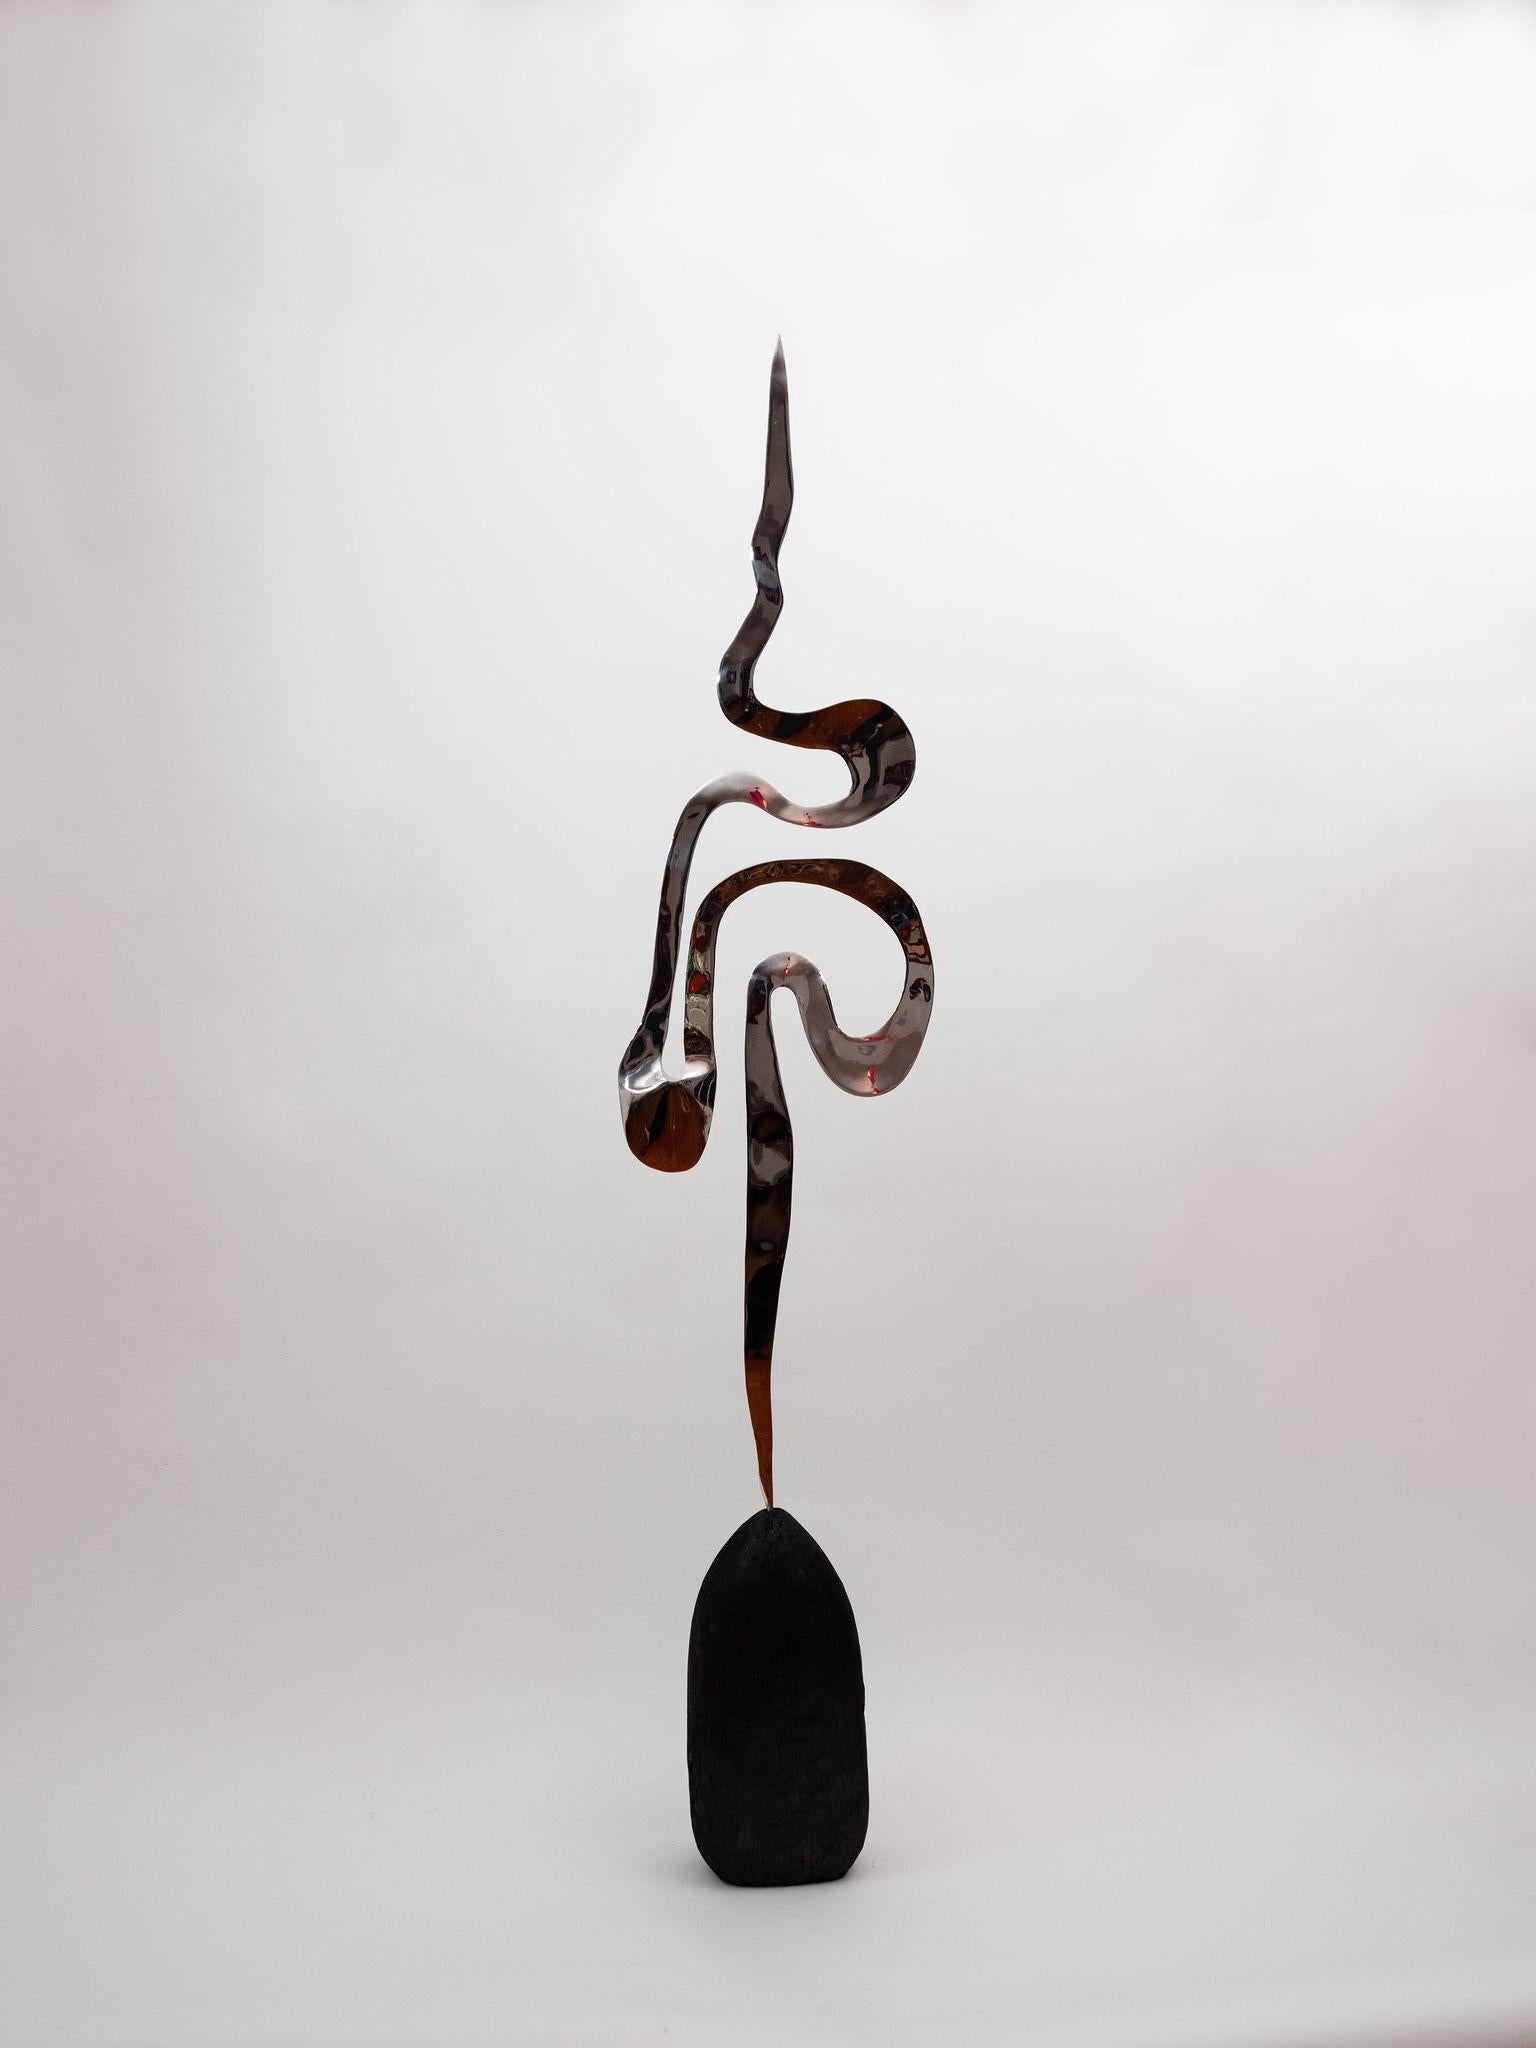 Plume Sculpture by Sol Bailey Barker

Charred Wood & Mirror Polished Stainless Steel

H 79